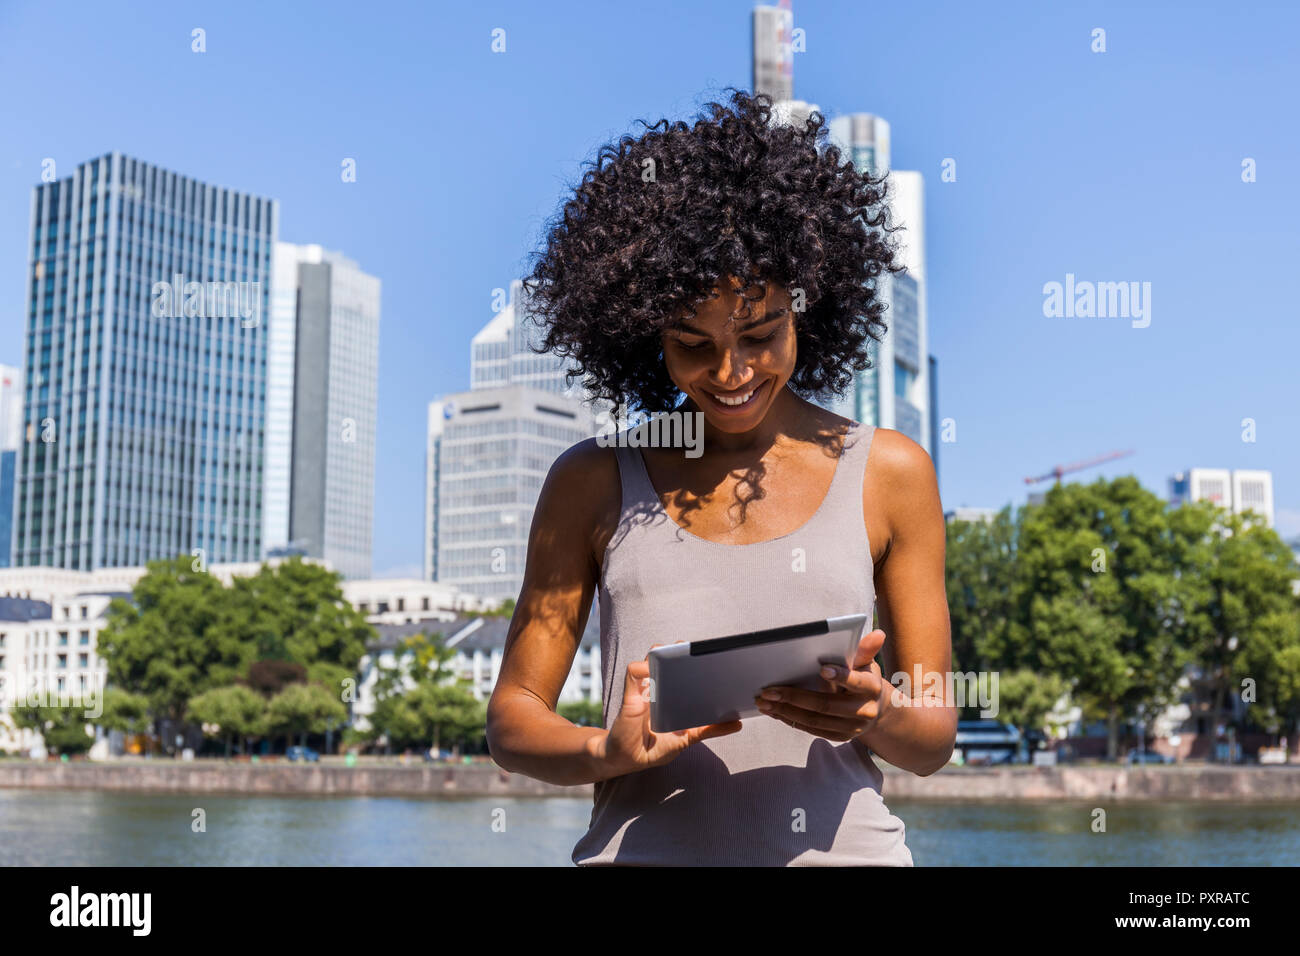 Germany, Frankfurt, smiling young woman with curly hair using tablet in the city Stock Photo